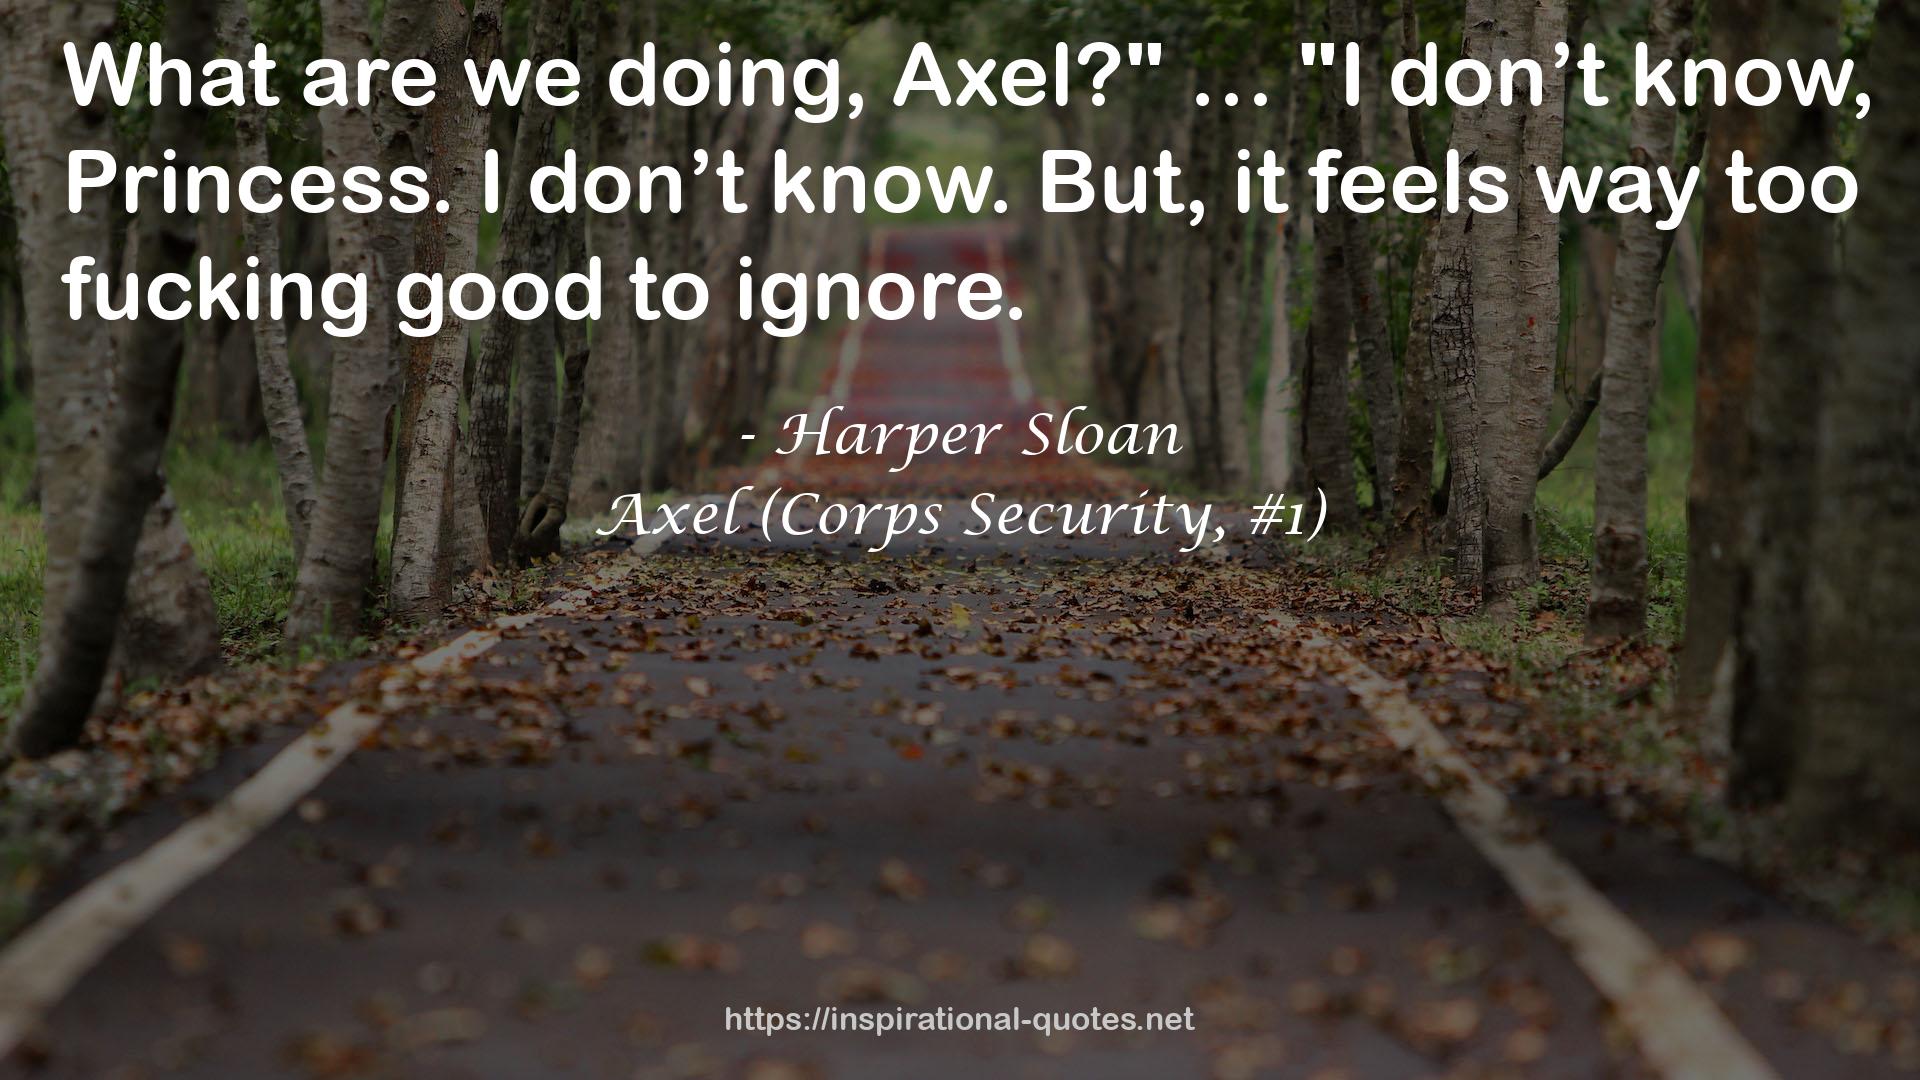 Axel (Corps Security, #1) QUOTES